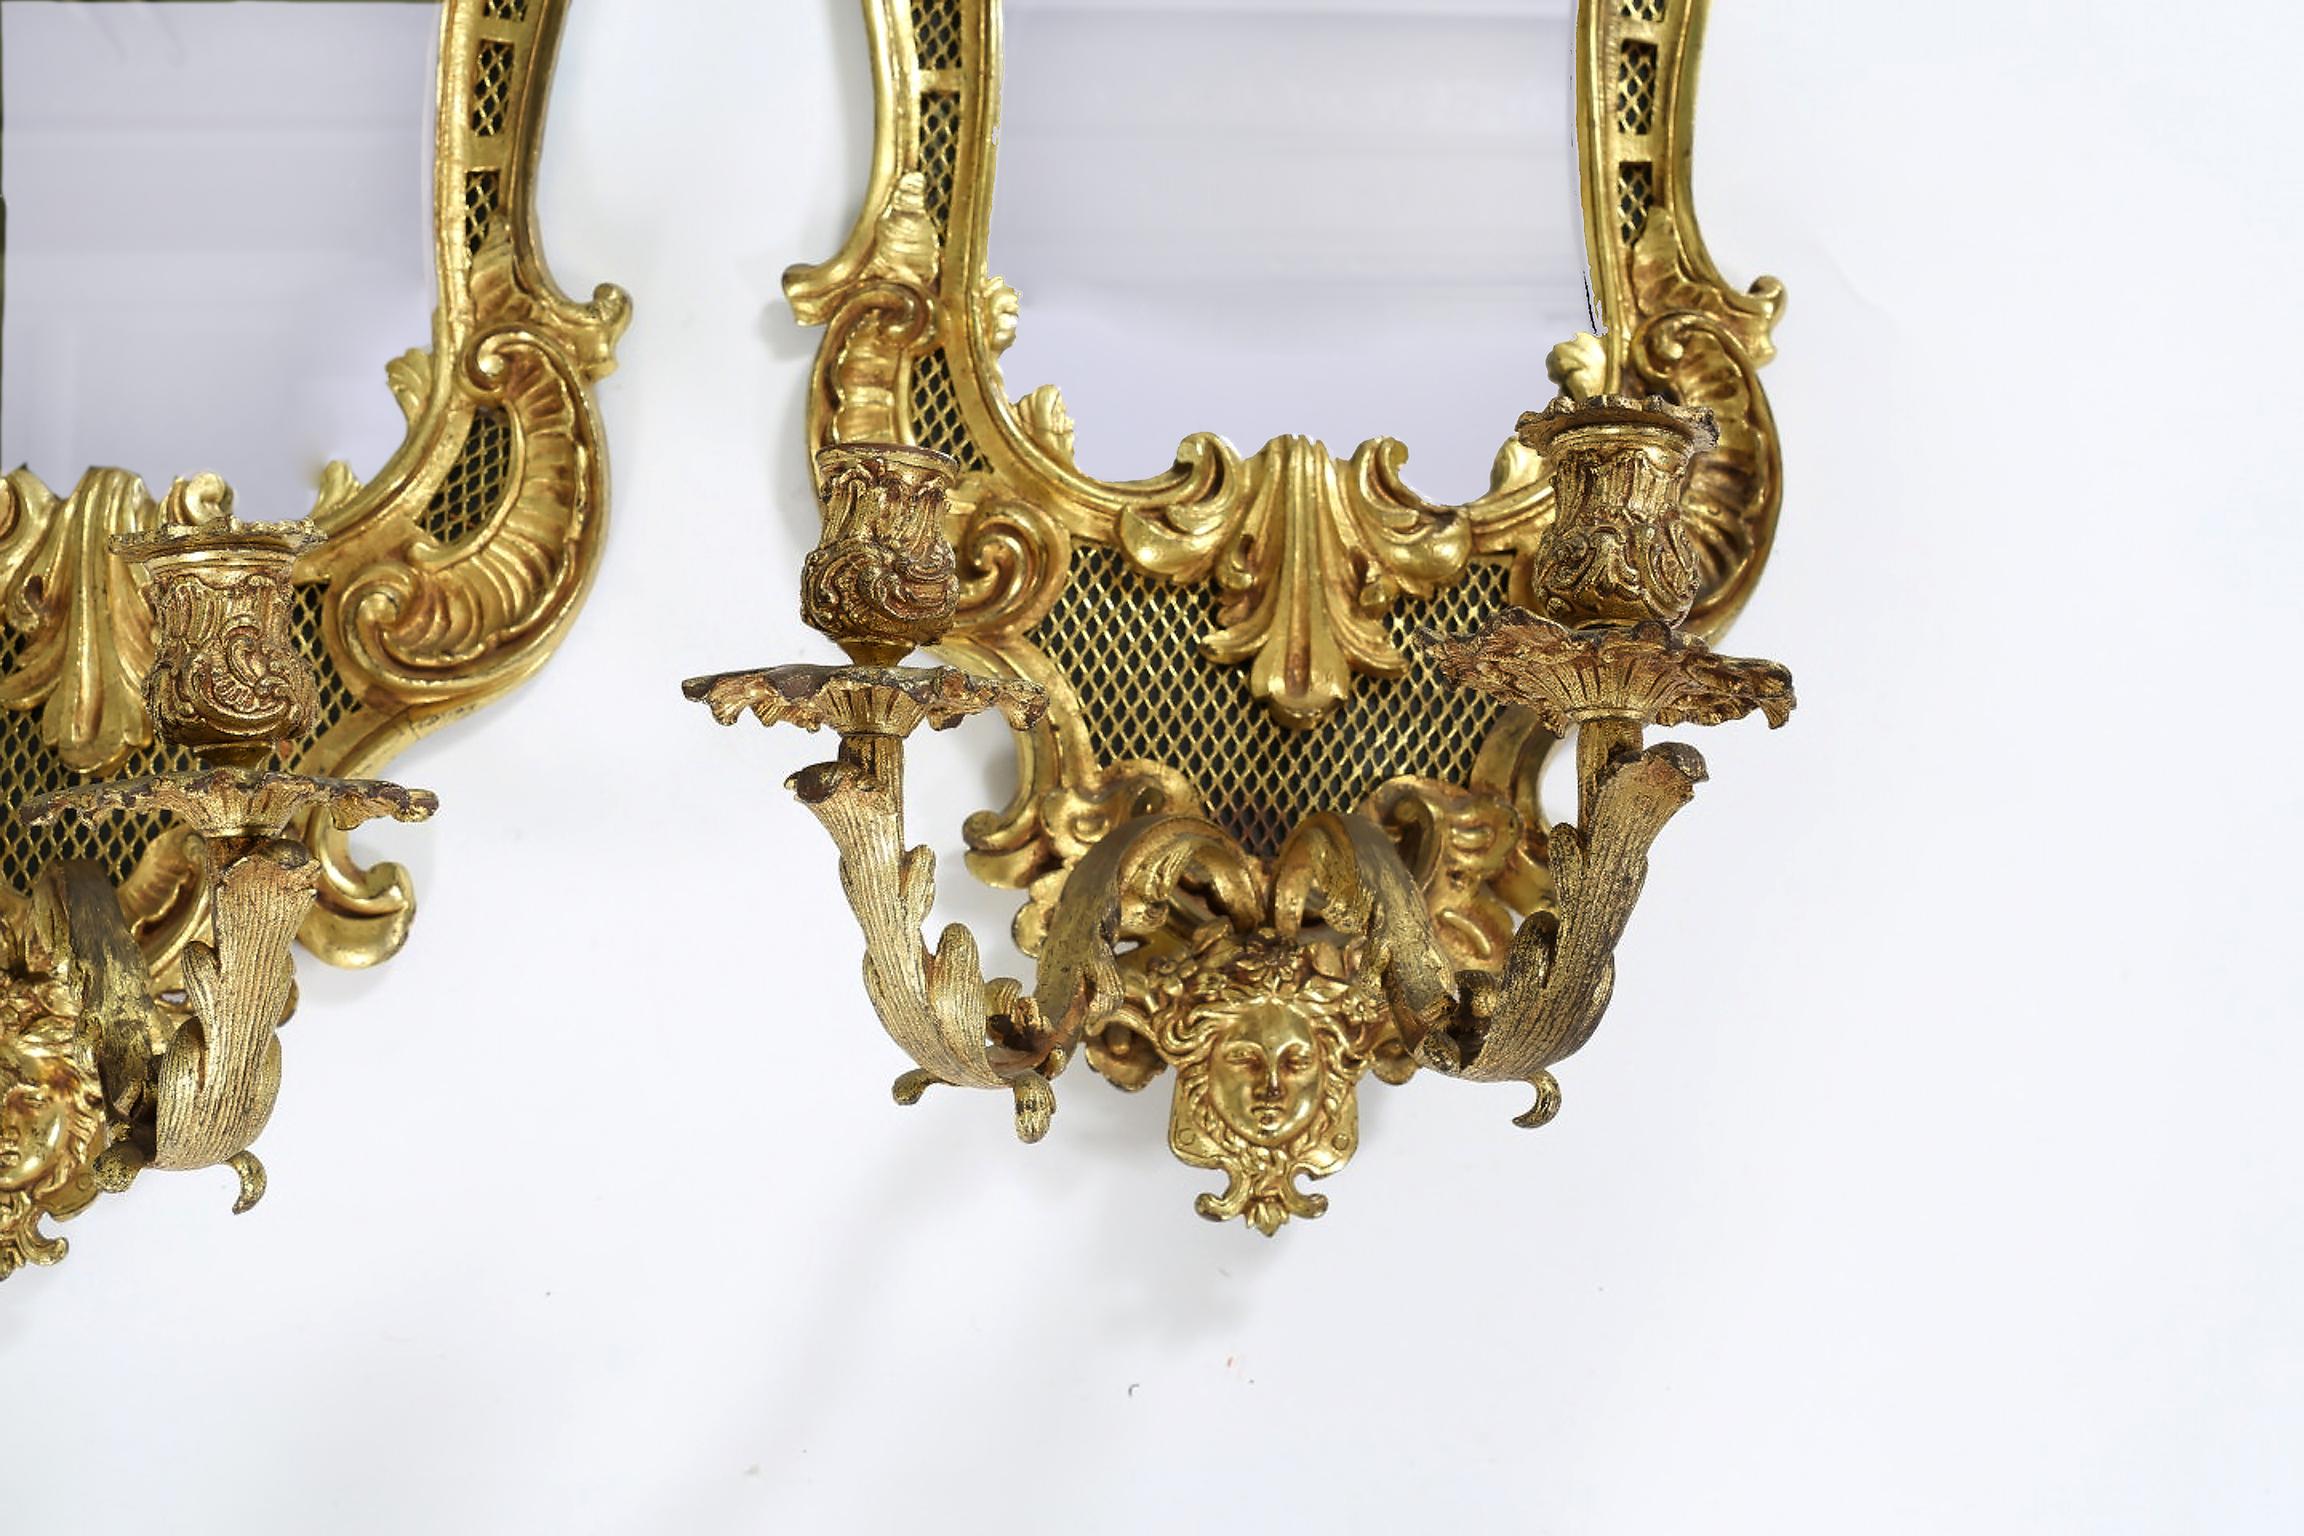 Pair of large bronze mirrored back sconces with two armed lights. Each one is in good condition with minor wear consistent with age / use. Each one measure about 24 inches high x 13 inches wide.